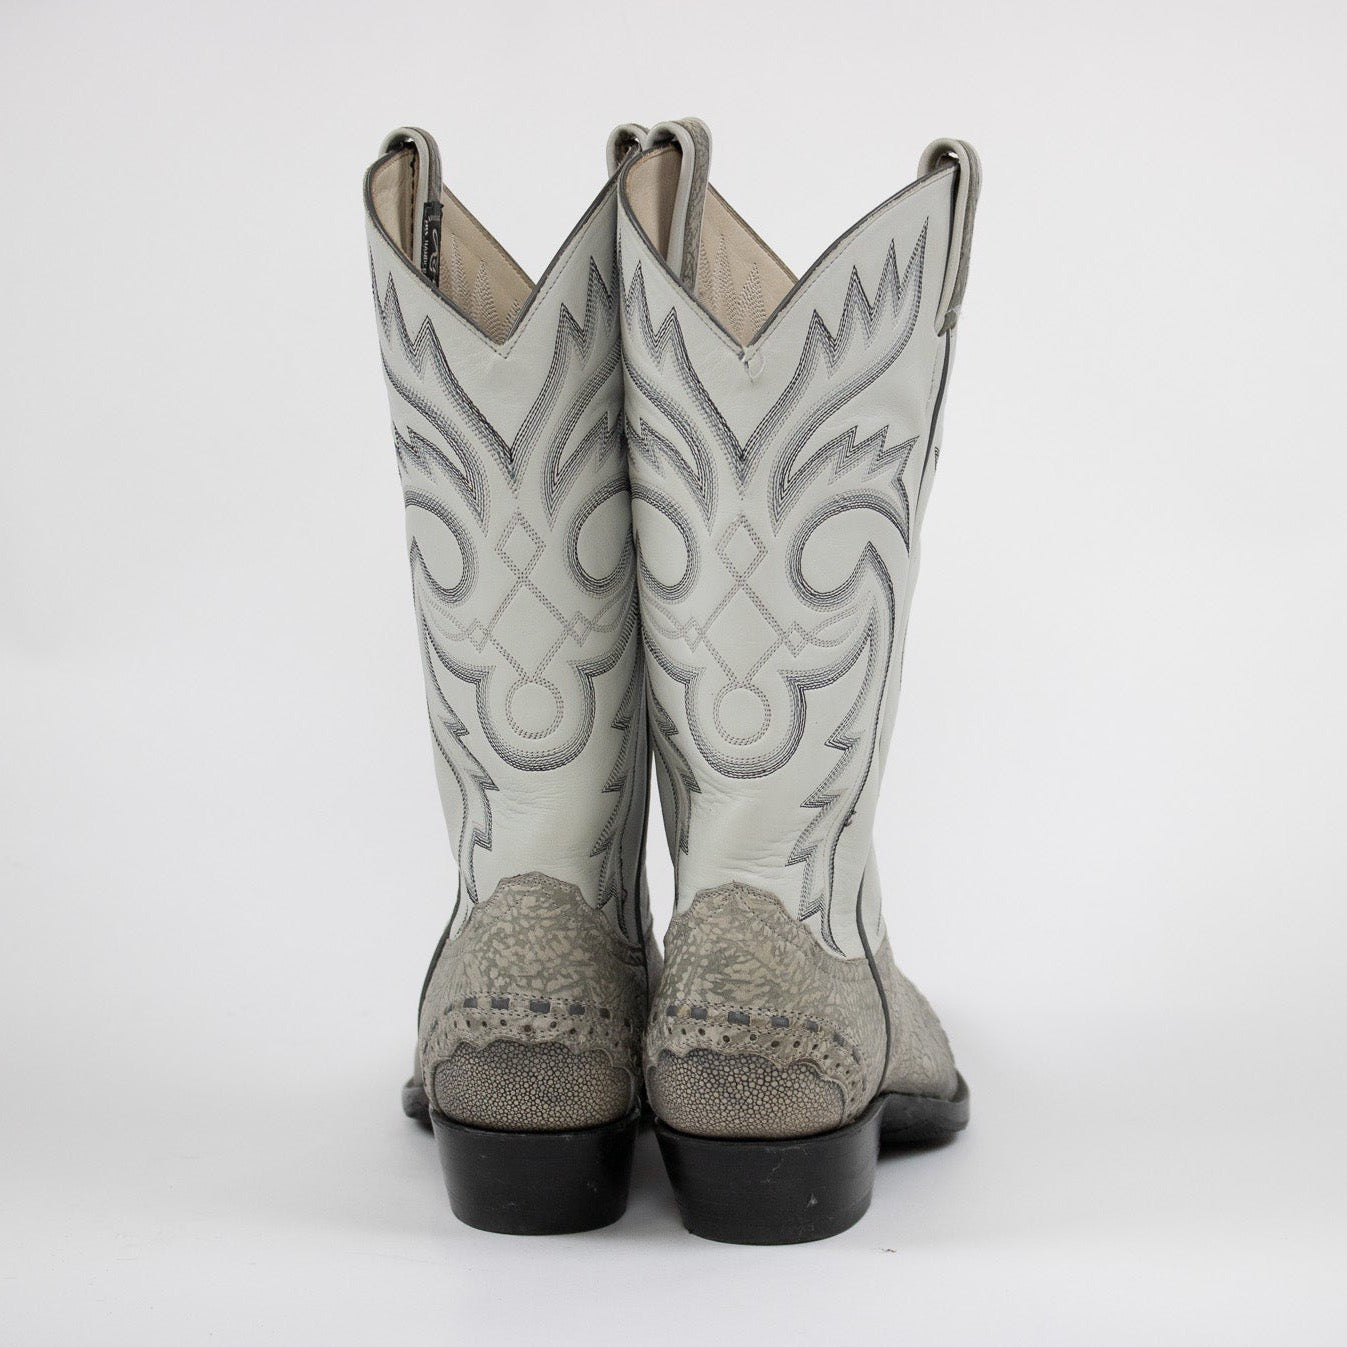 Exotic Lucchese Handmade Stingray Cowboy Boots